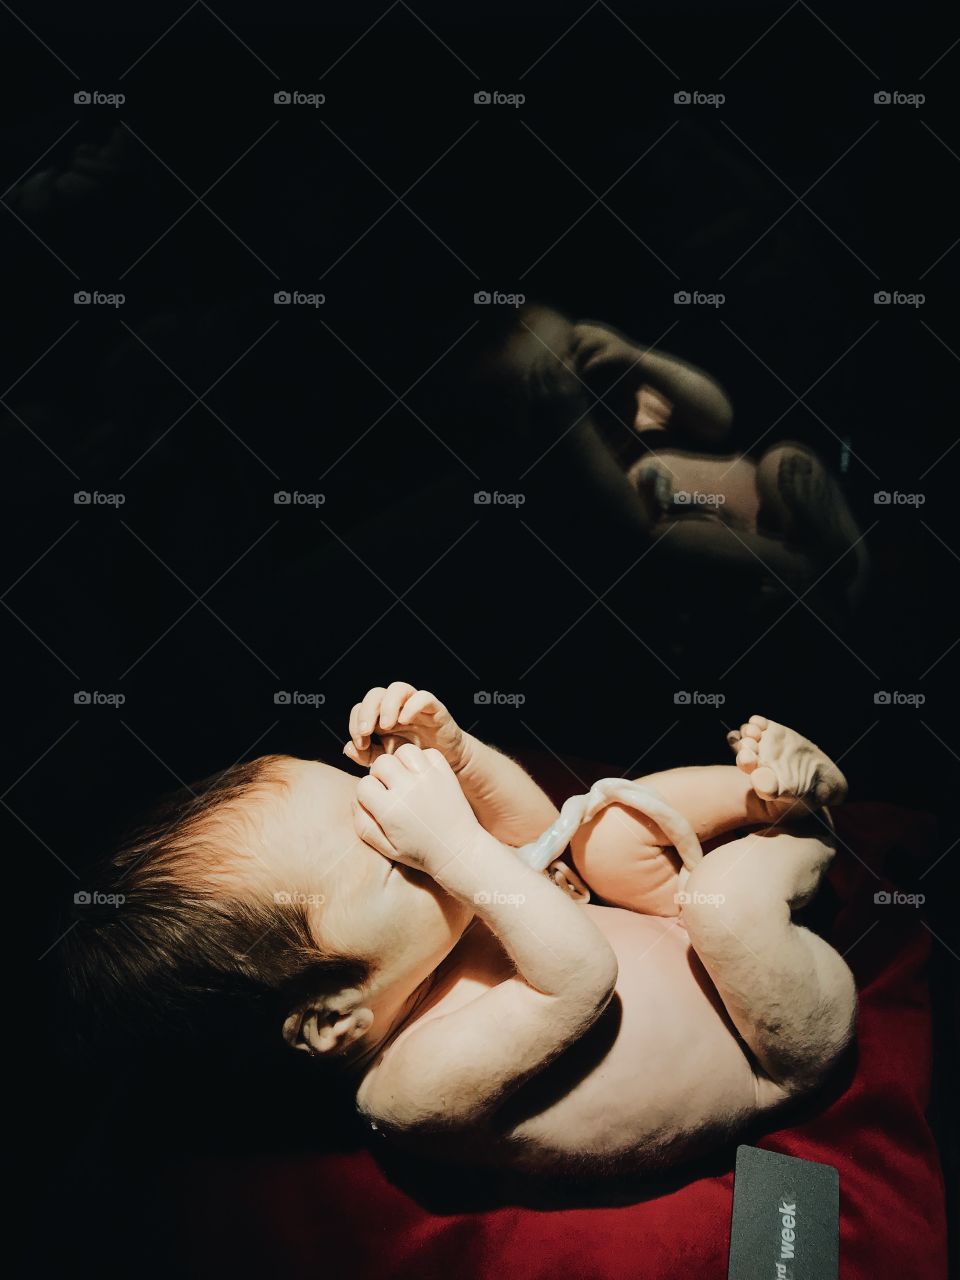 Close to the final stage of fetal development. Photo taken at Body World Exhibit in Germany. 